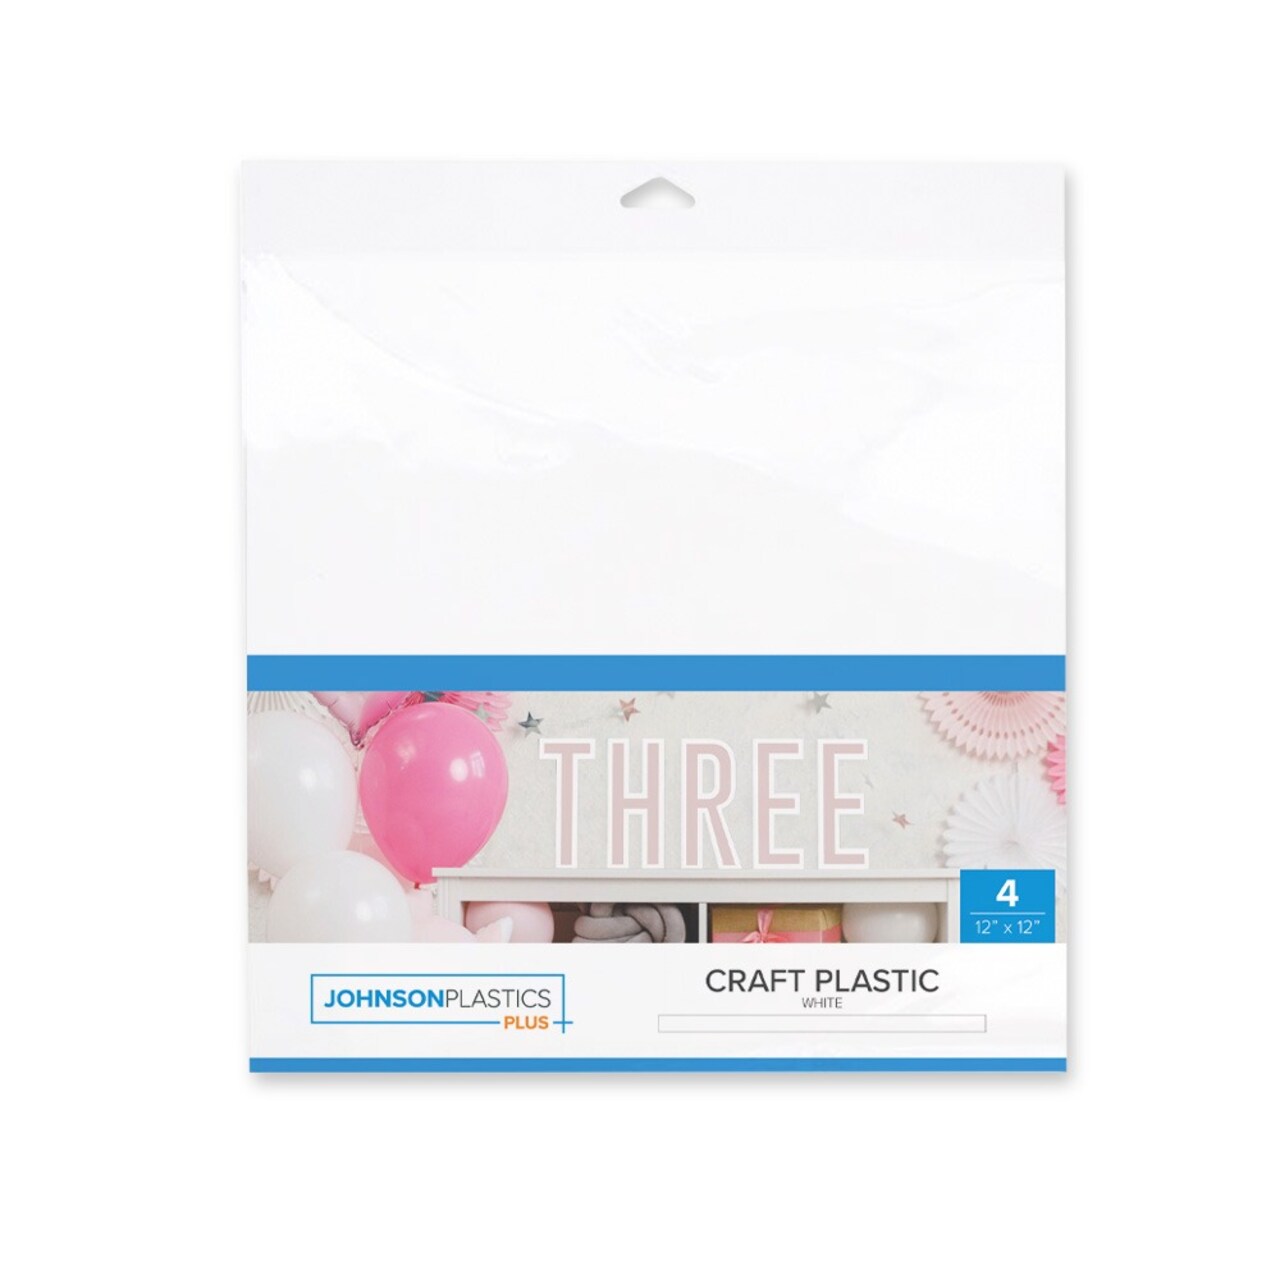 Craft Plastic Sheet Pack, White - 4 sheets per pack